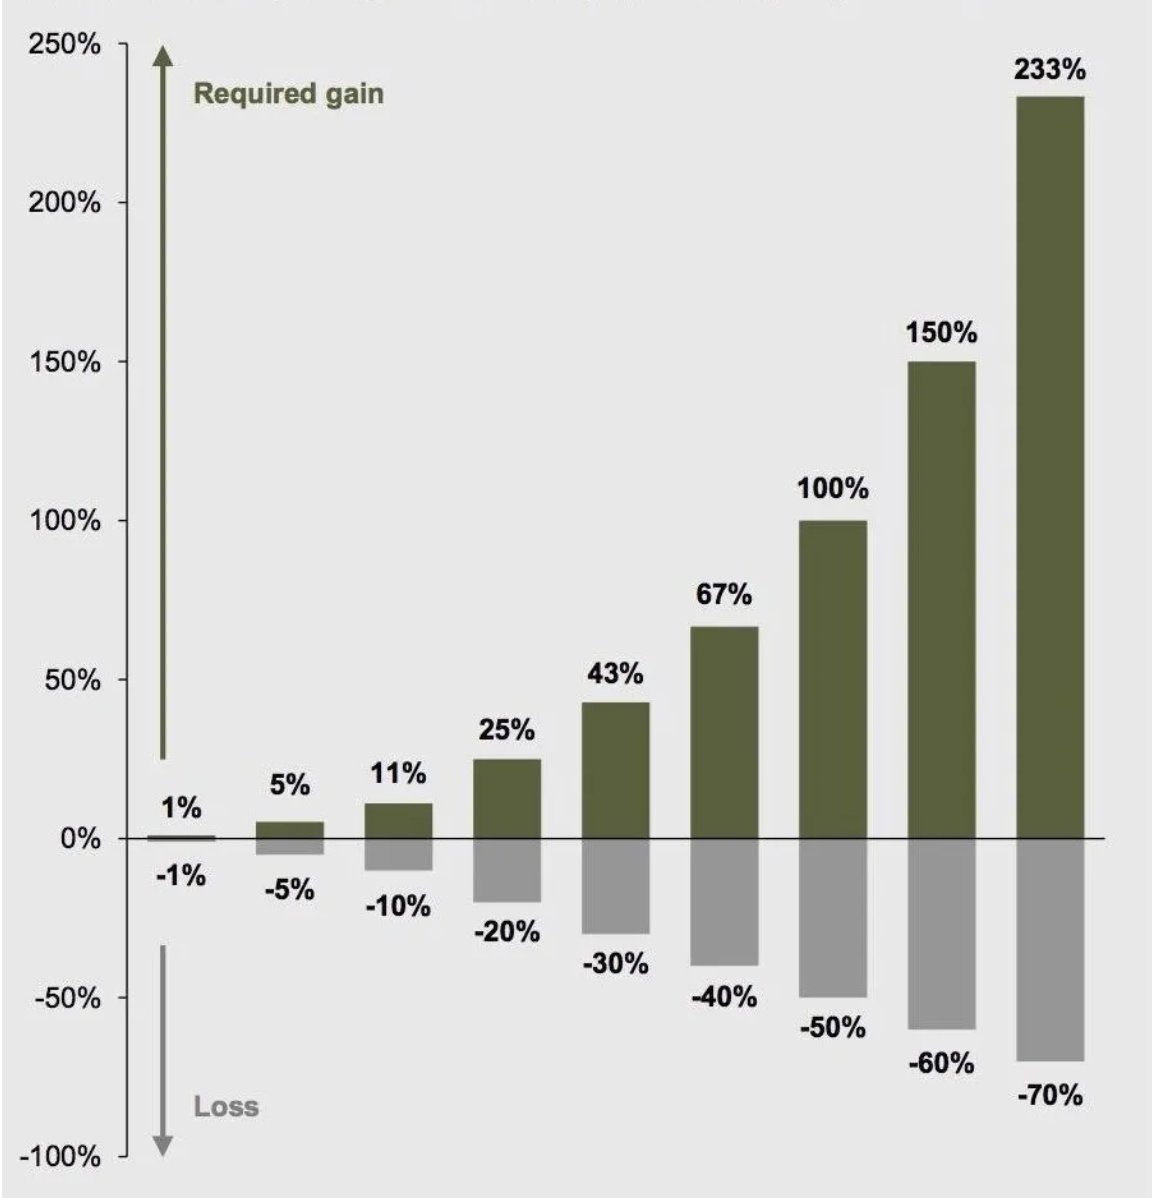 Percentage gains needed to recover from a loss: